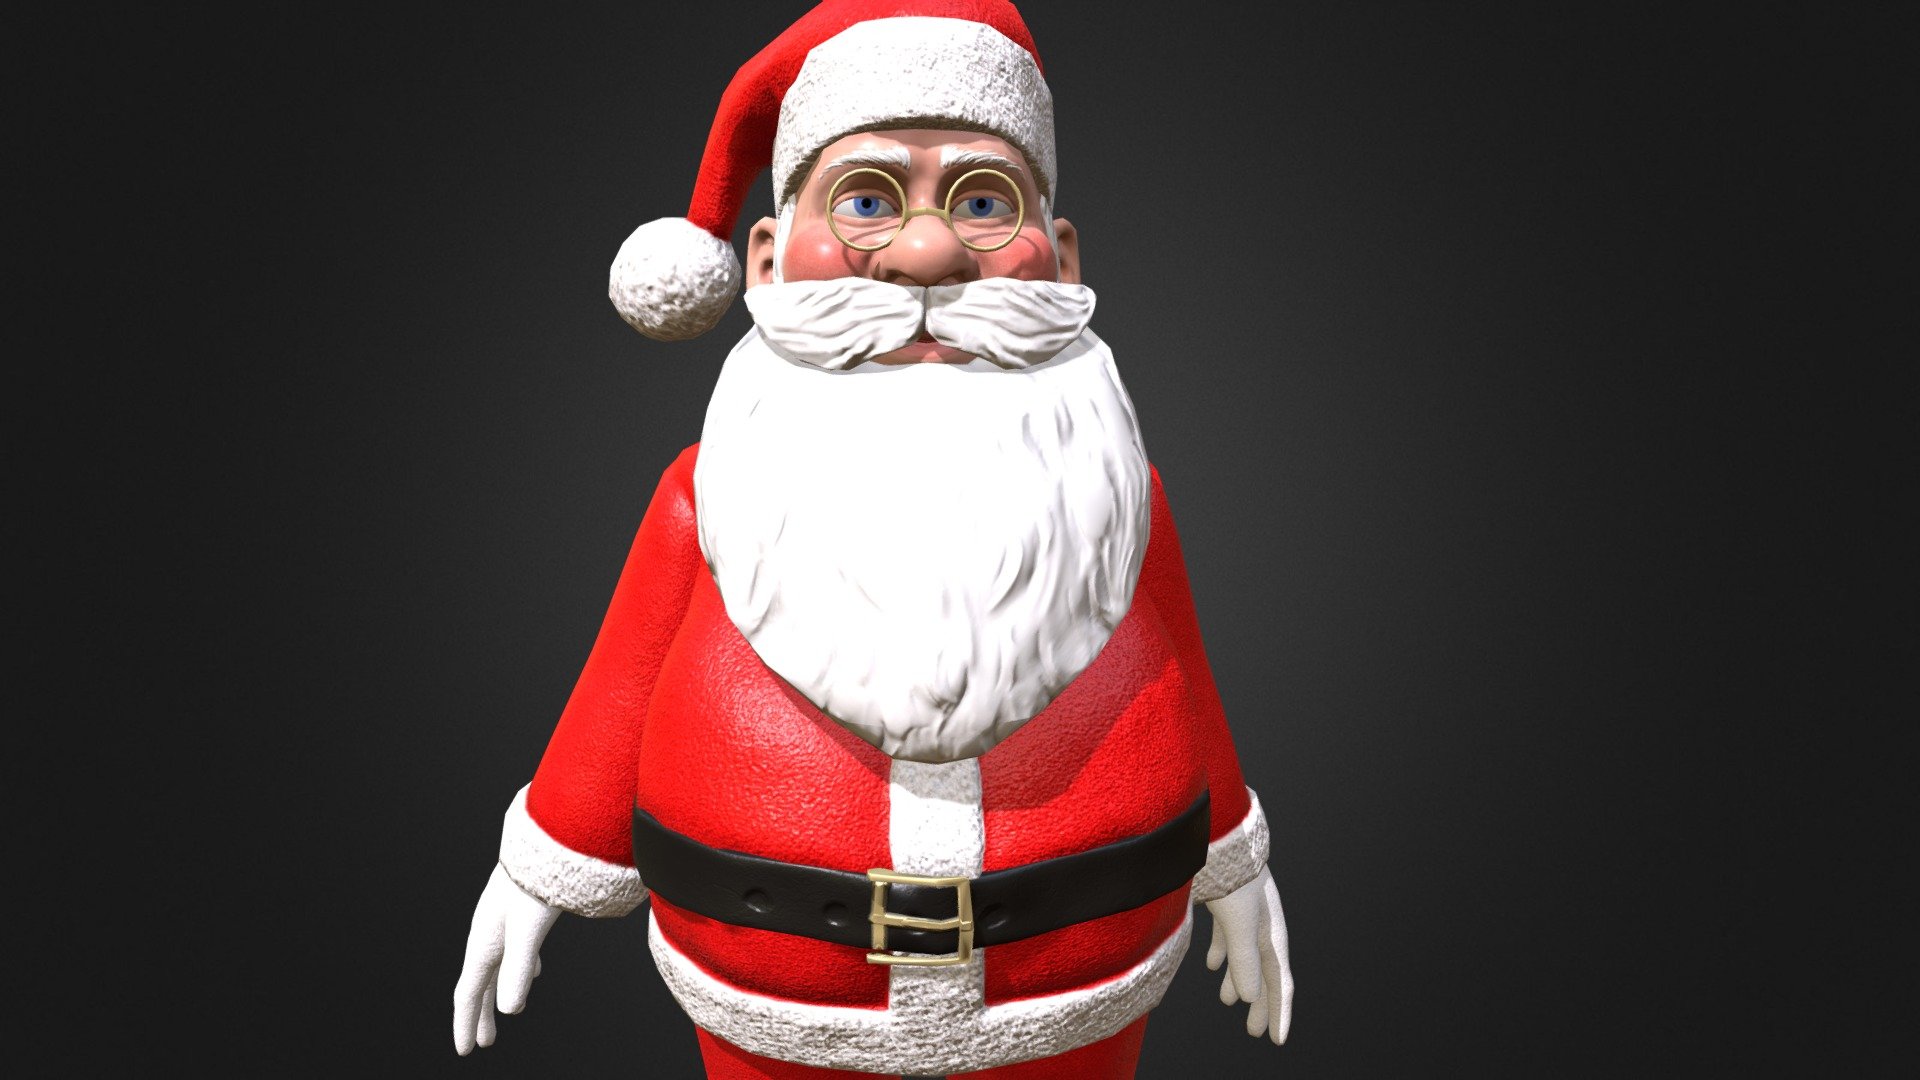 Santa Claus stylized game ready rigged animated